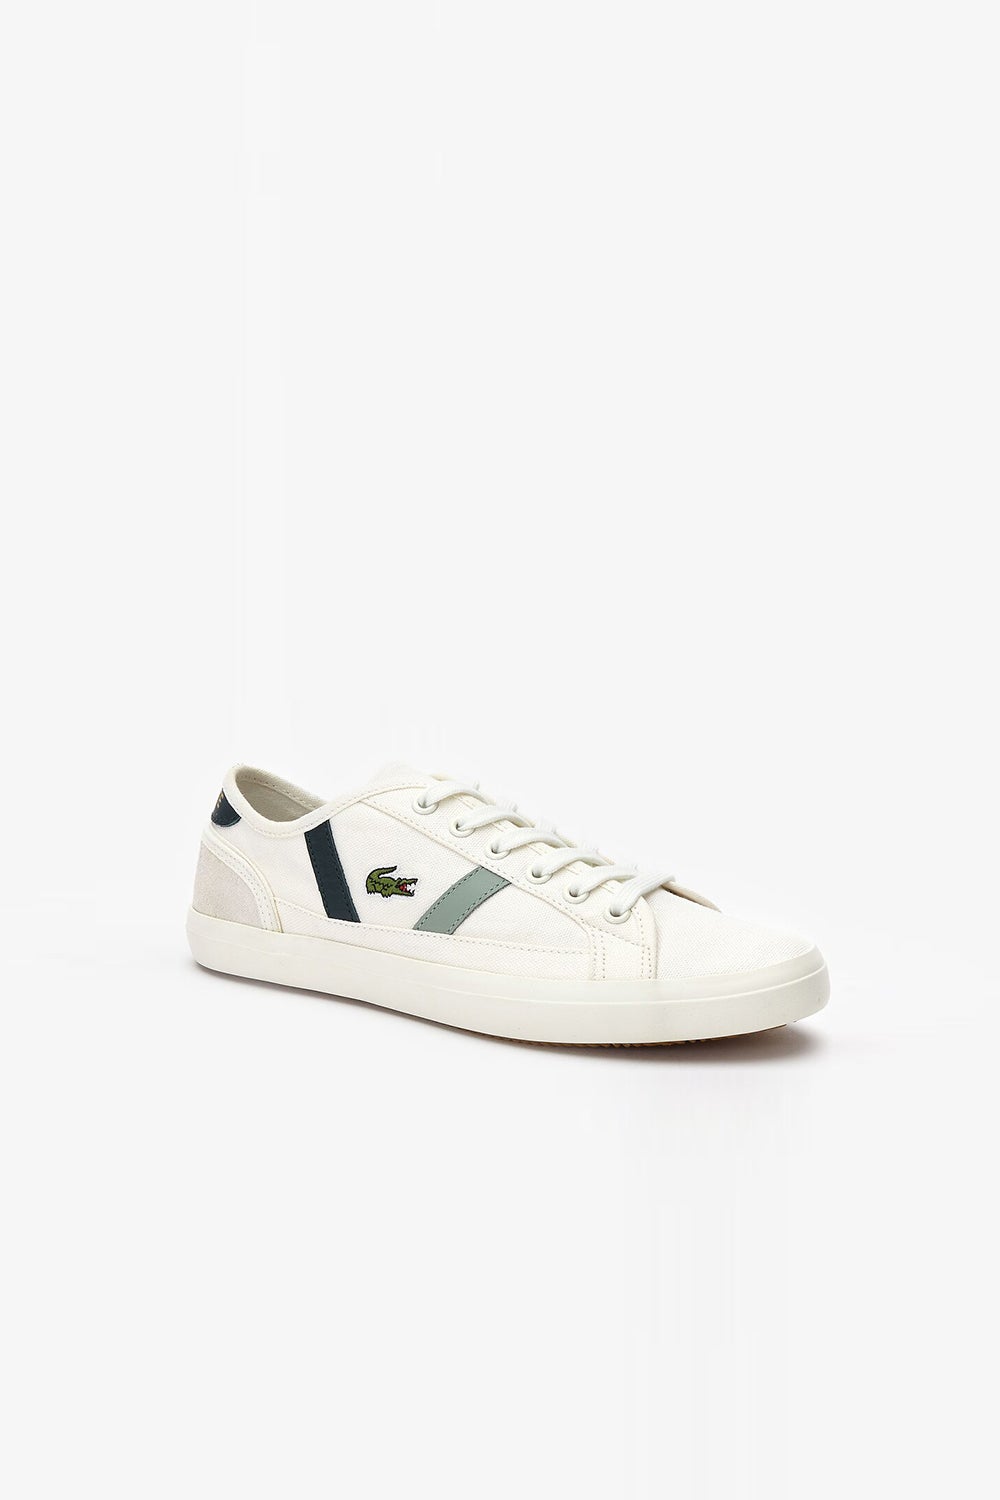 Lacoste Sideline Canvas and Leather Trainers W